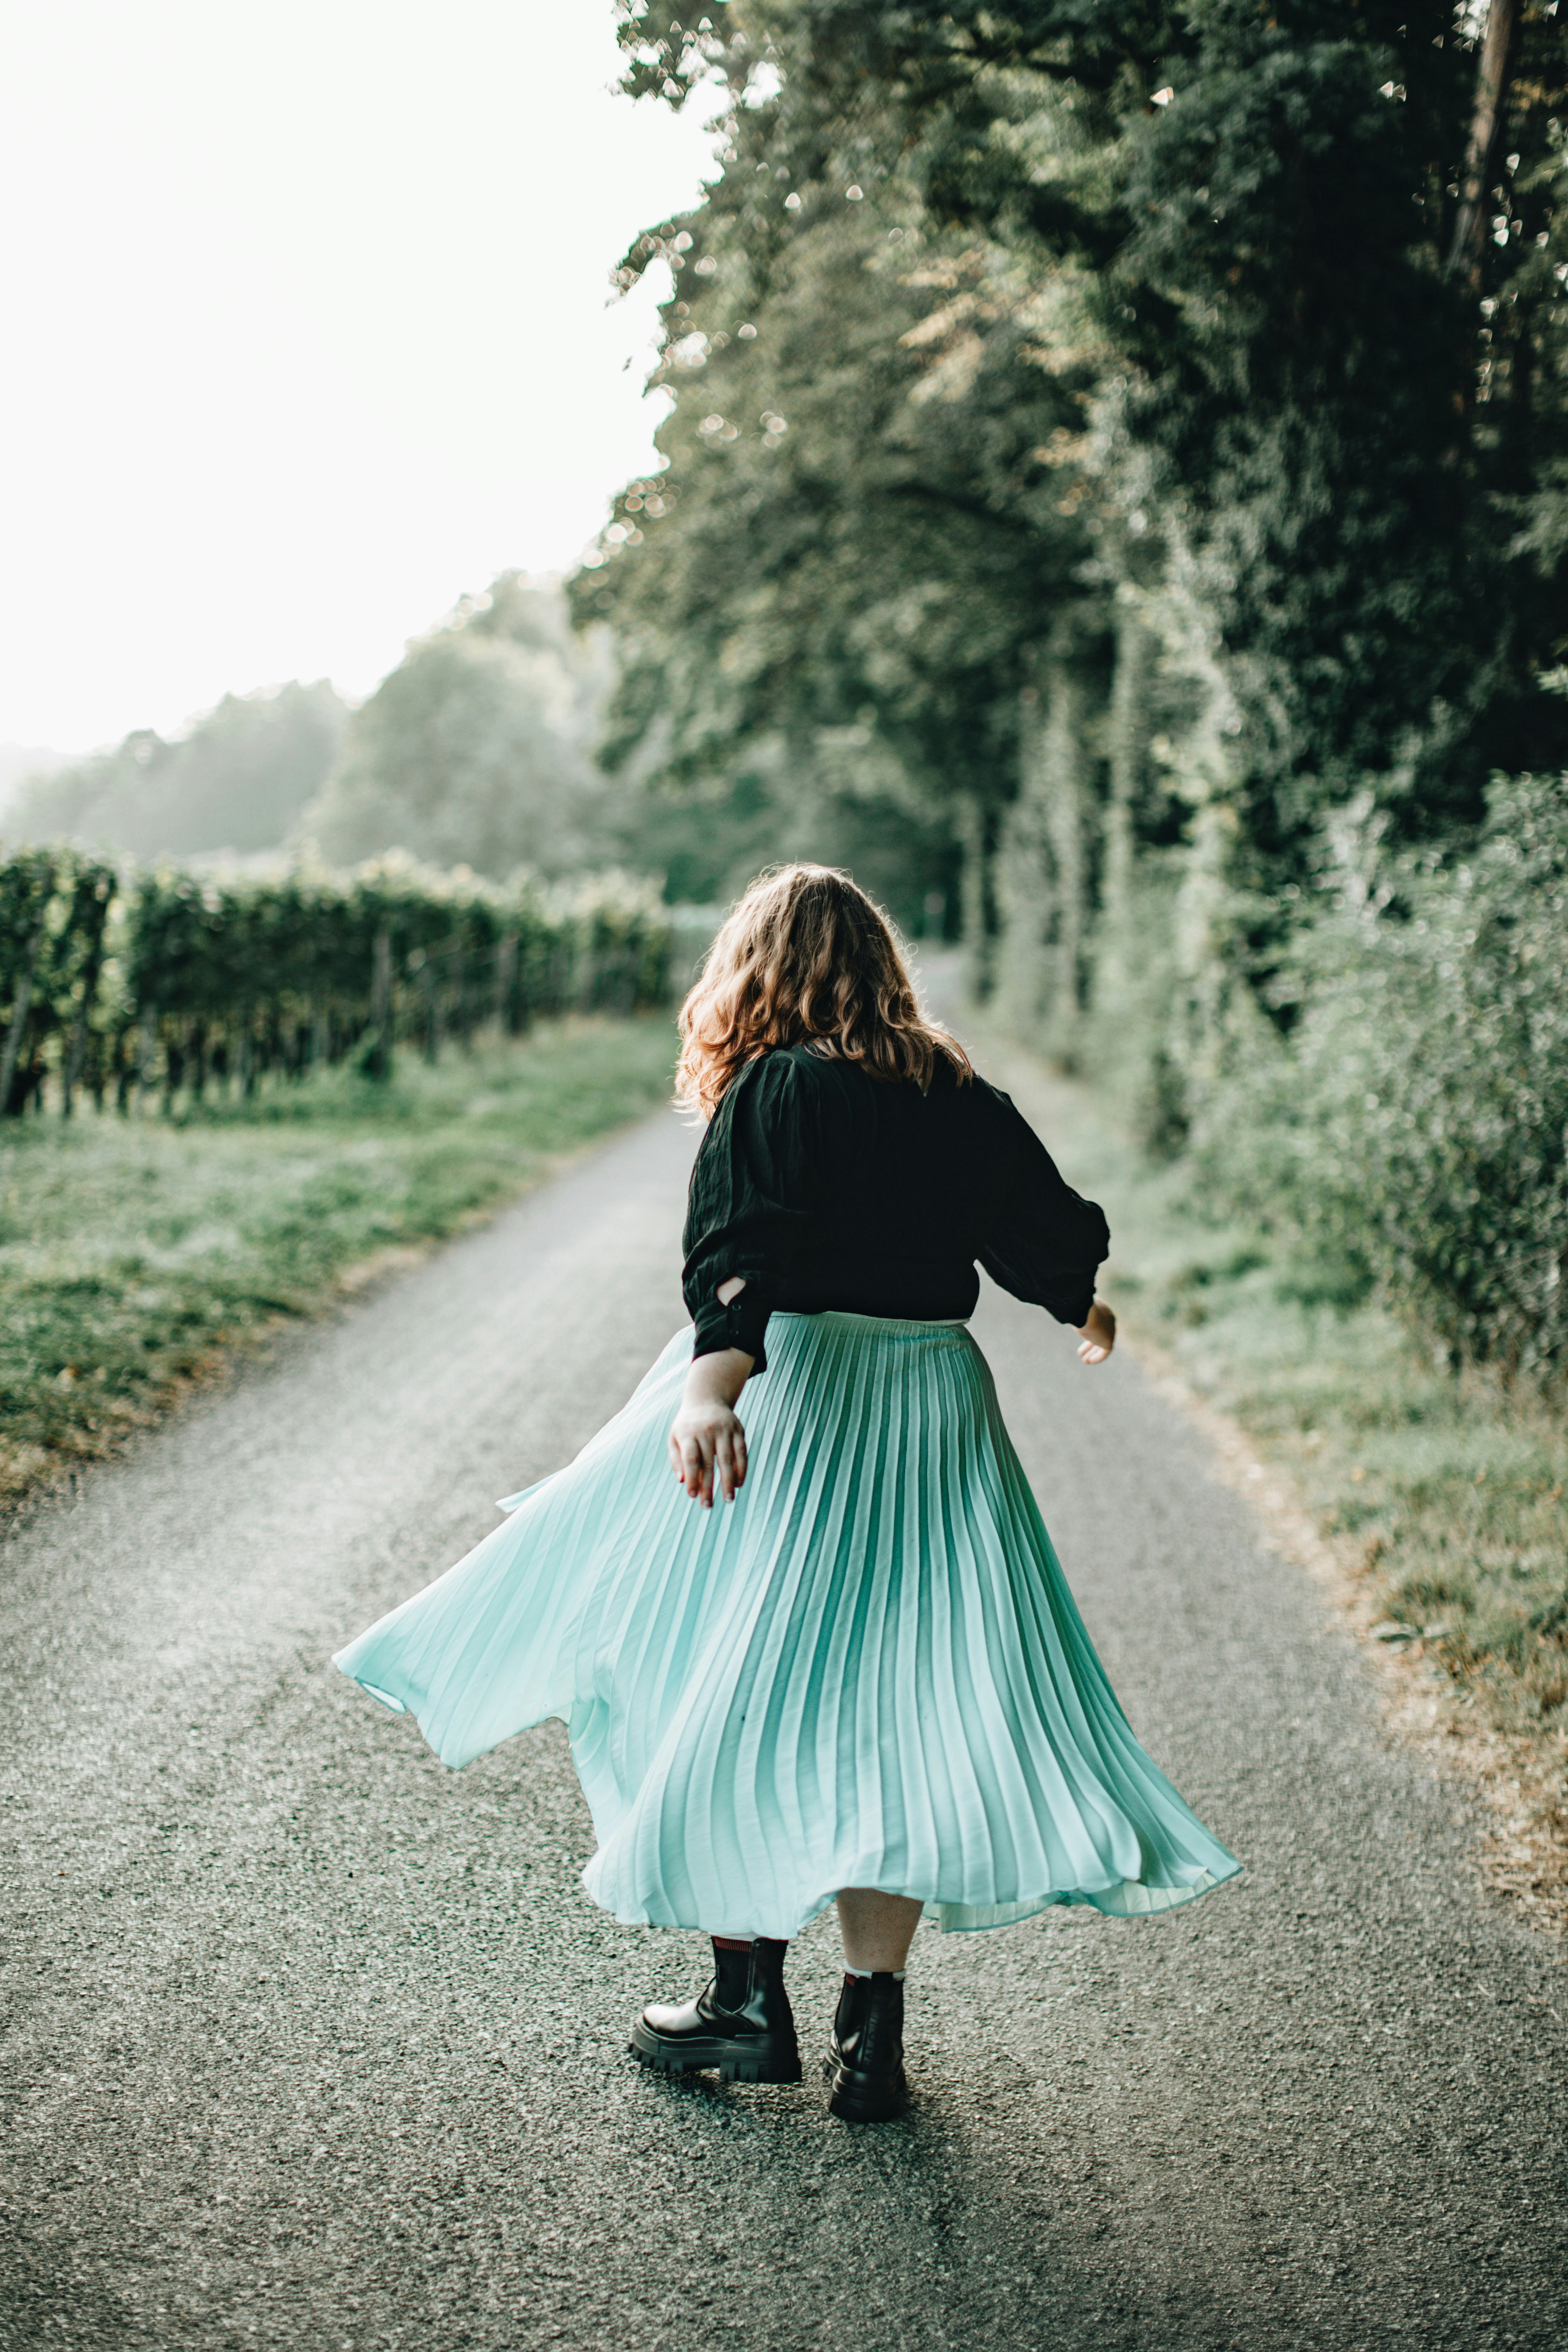 woman in black long sleeve shirt and teal skirt walking on dirt road during daytime